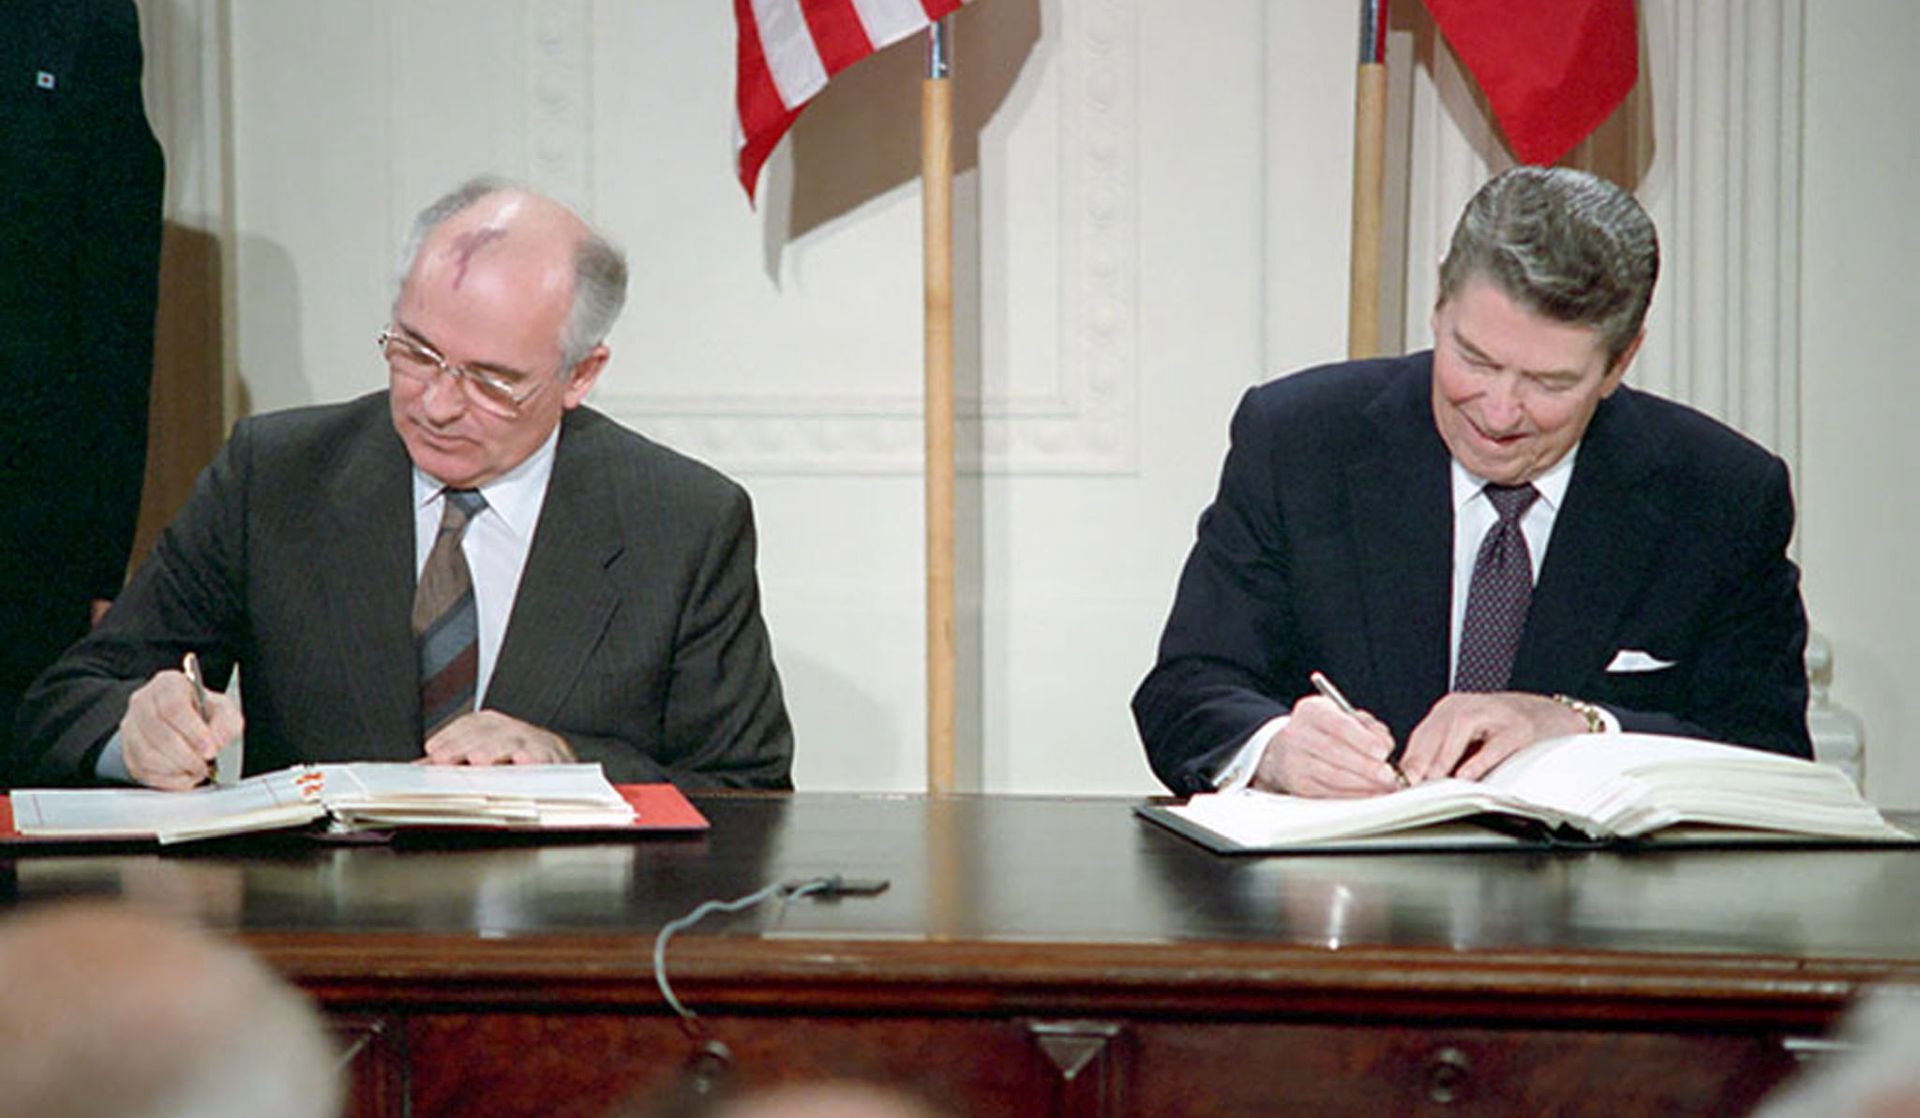 epa07753112 (FILE) - A handout photo made available by the Ronald Reagan Presidential Library Museum shows US President Ronald Reagan and Soviet General Secretary Michhail Gorbachev signing the INF Treaty in the East Room of the White House in Washington D.C., USA, 08 December 1987 (reissued 02 August 2019). US formally withdraws from Intermediate-Range Nuclear Forces Treaty  with Russia on 02 August 2019.  EPA/RONALD REAGAN PRESIDENTIAL LIBRARY HANDOUT - MANDATORY CREDIT -- HANDOUT EDITORIAL USE ONLY/NO SALES *** Local Caption *** 54950869